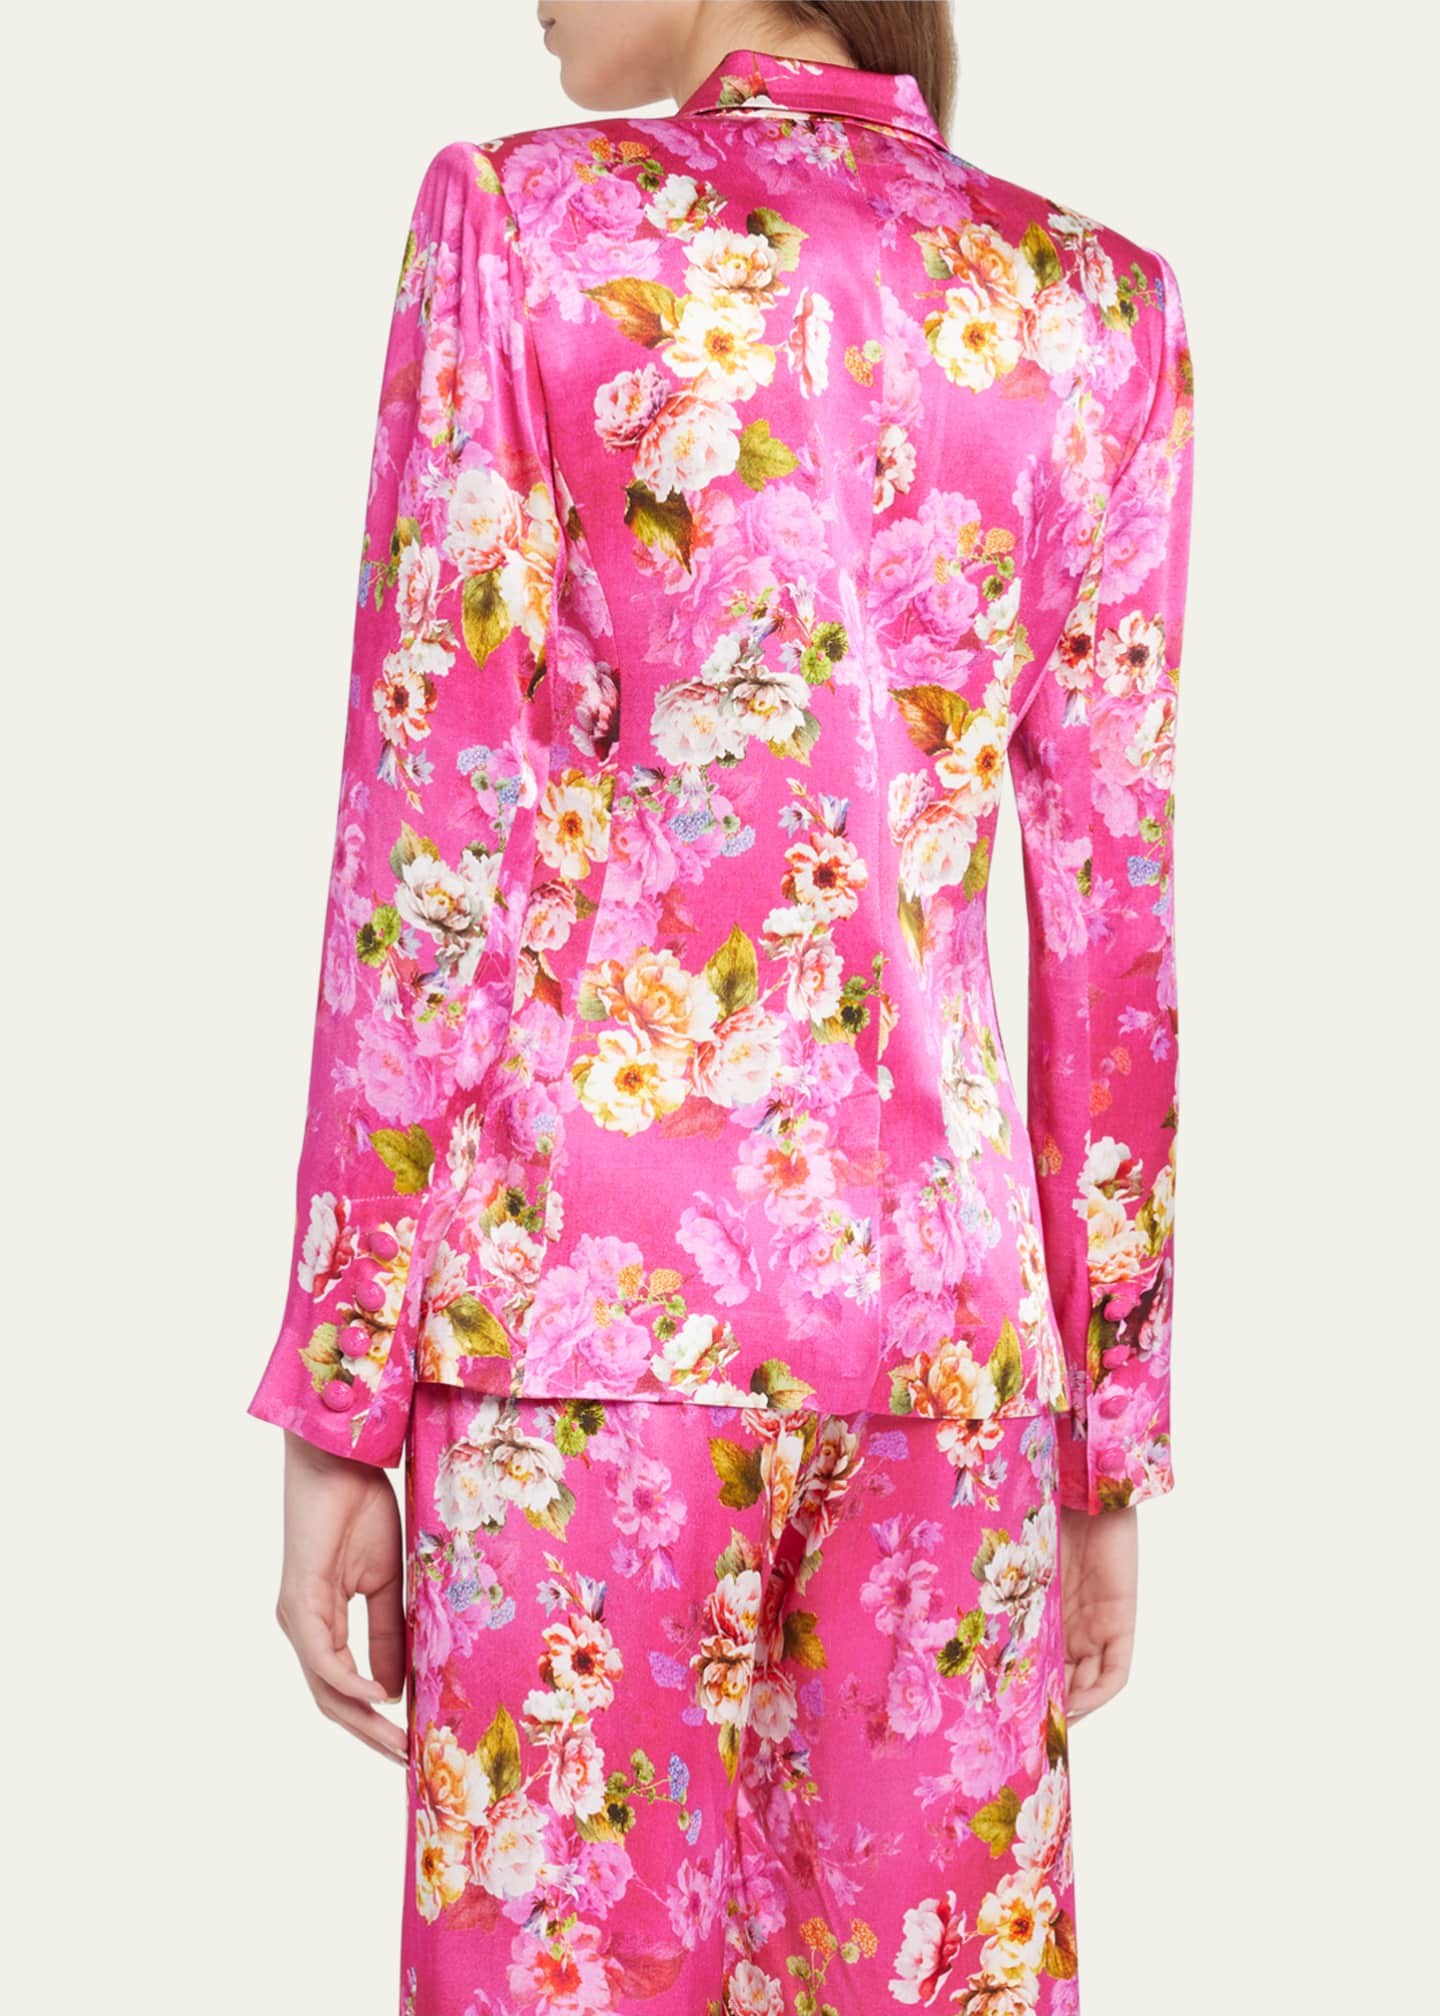 L'Agence Colin Double-Breasted Floral Satin Blazer - Bergdorf Goodman